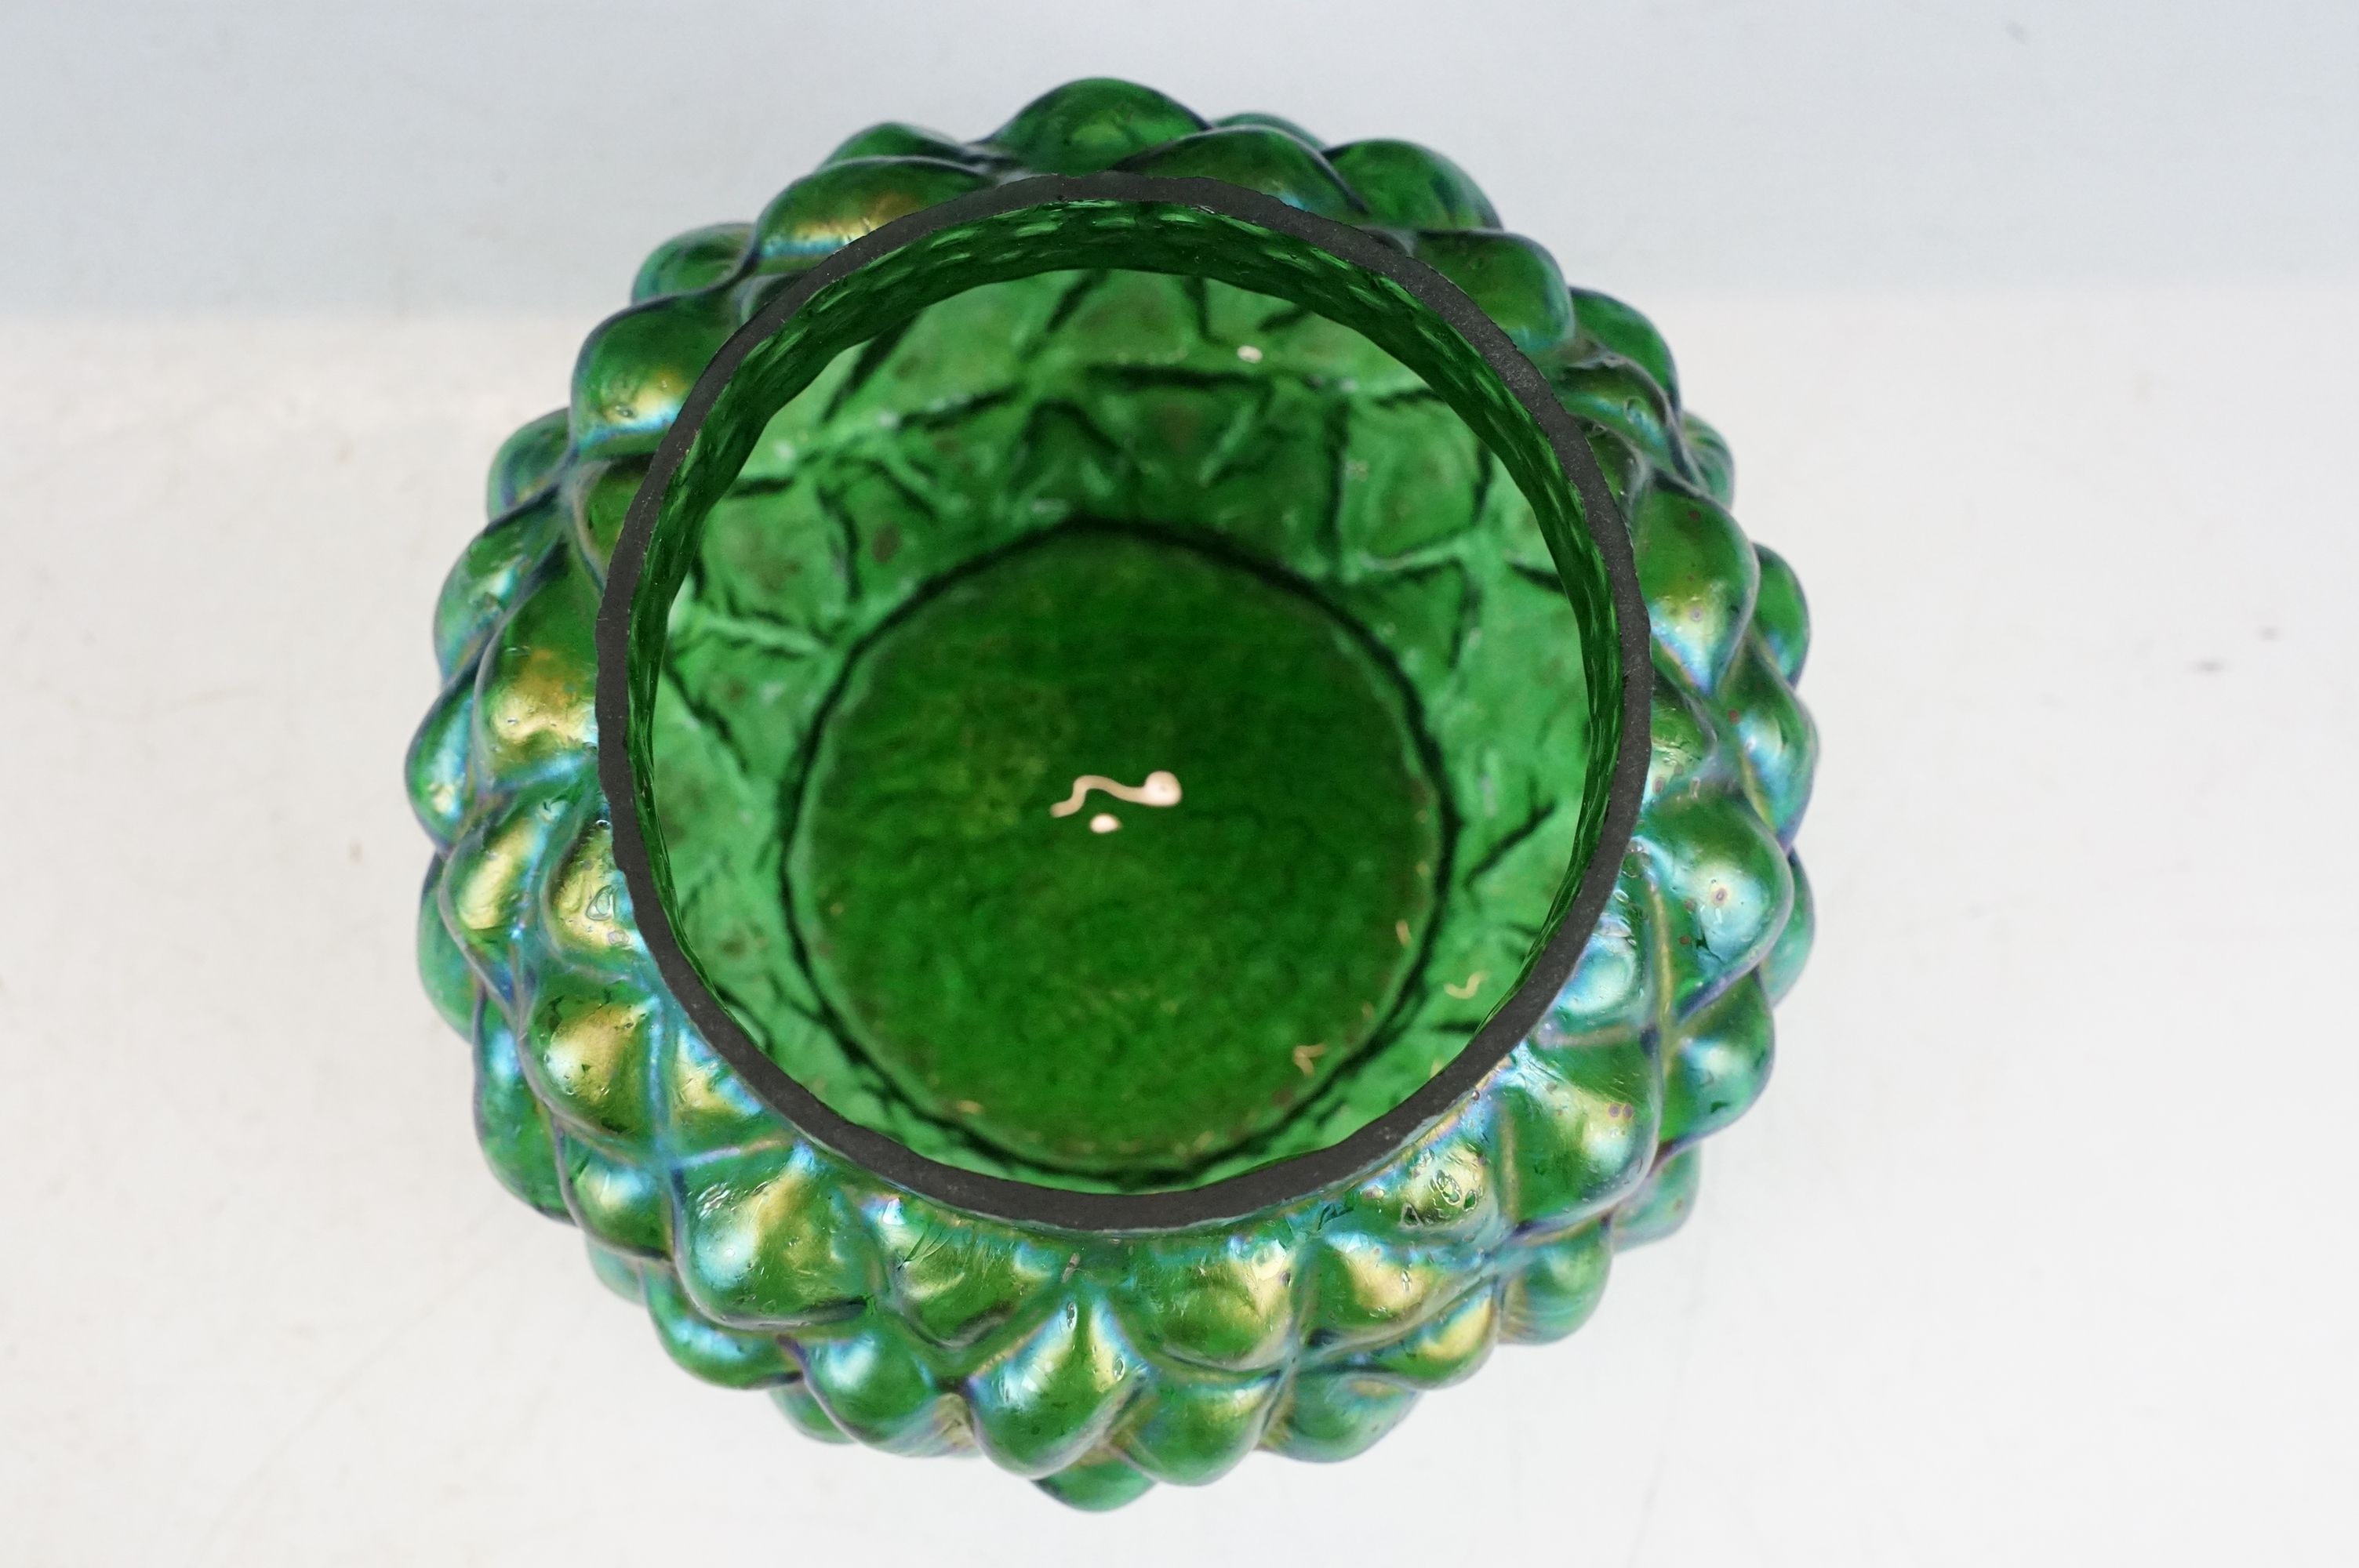 Two early 20th century Kralik iridescent glass rose bowls to include a green glass textured - Image 10 of 14